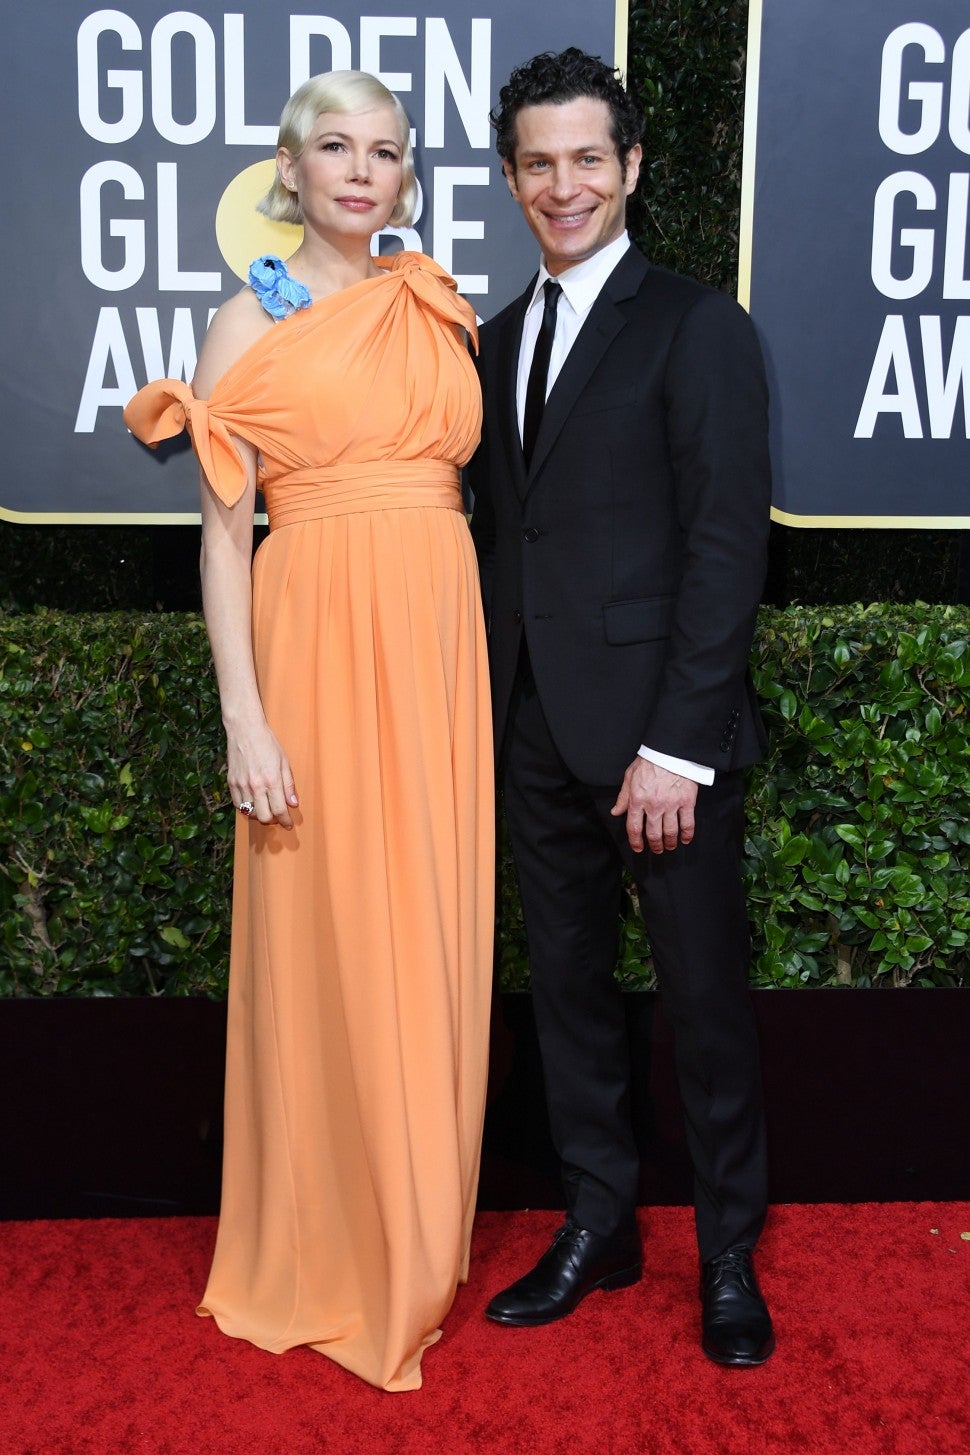 Michelle Williams and Thomas Kail at the 77th annual Golden Globe Awards